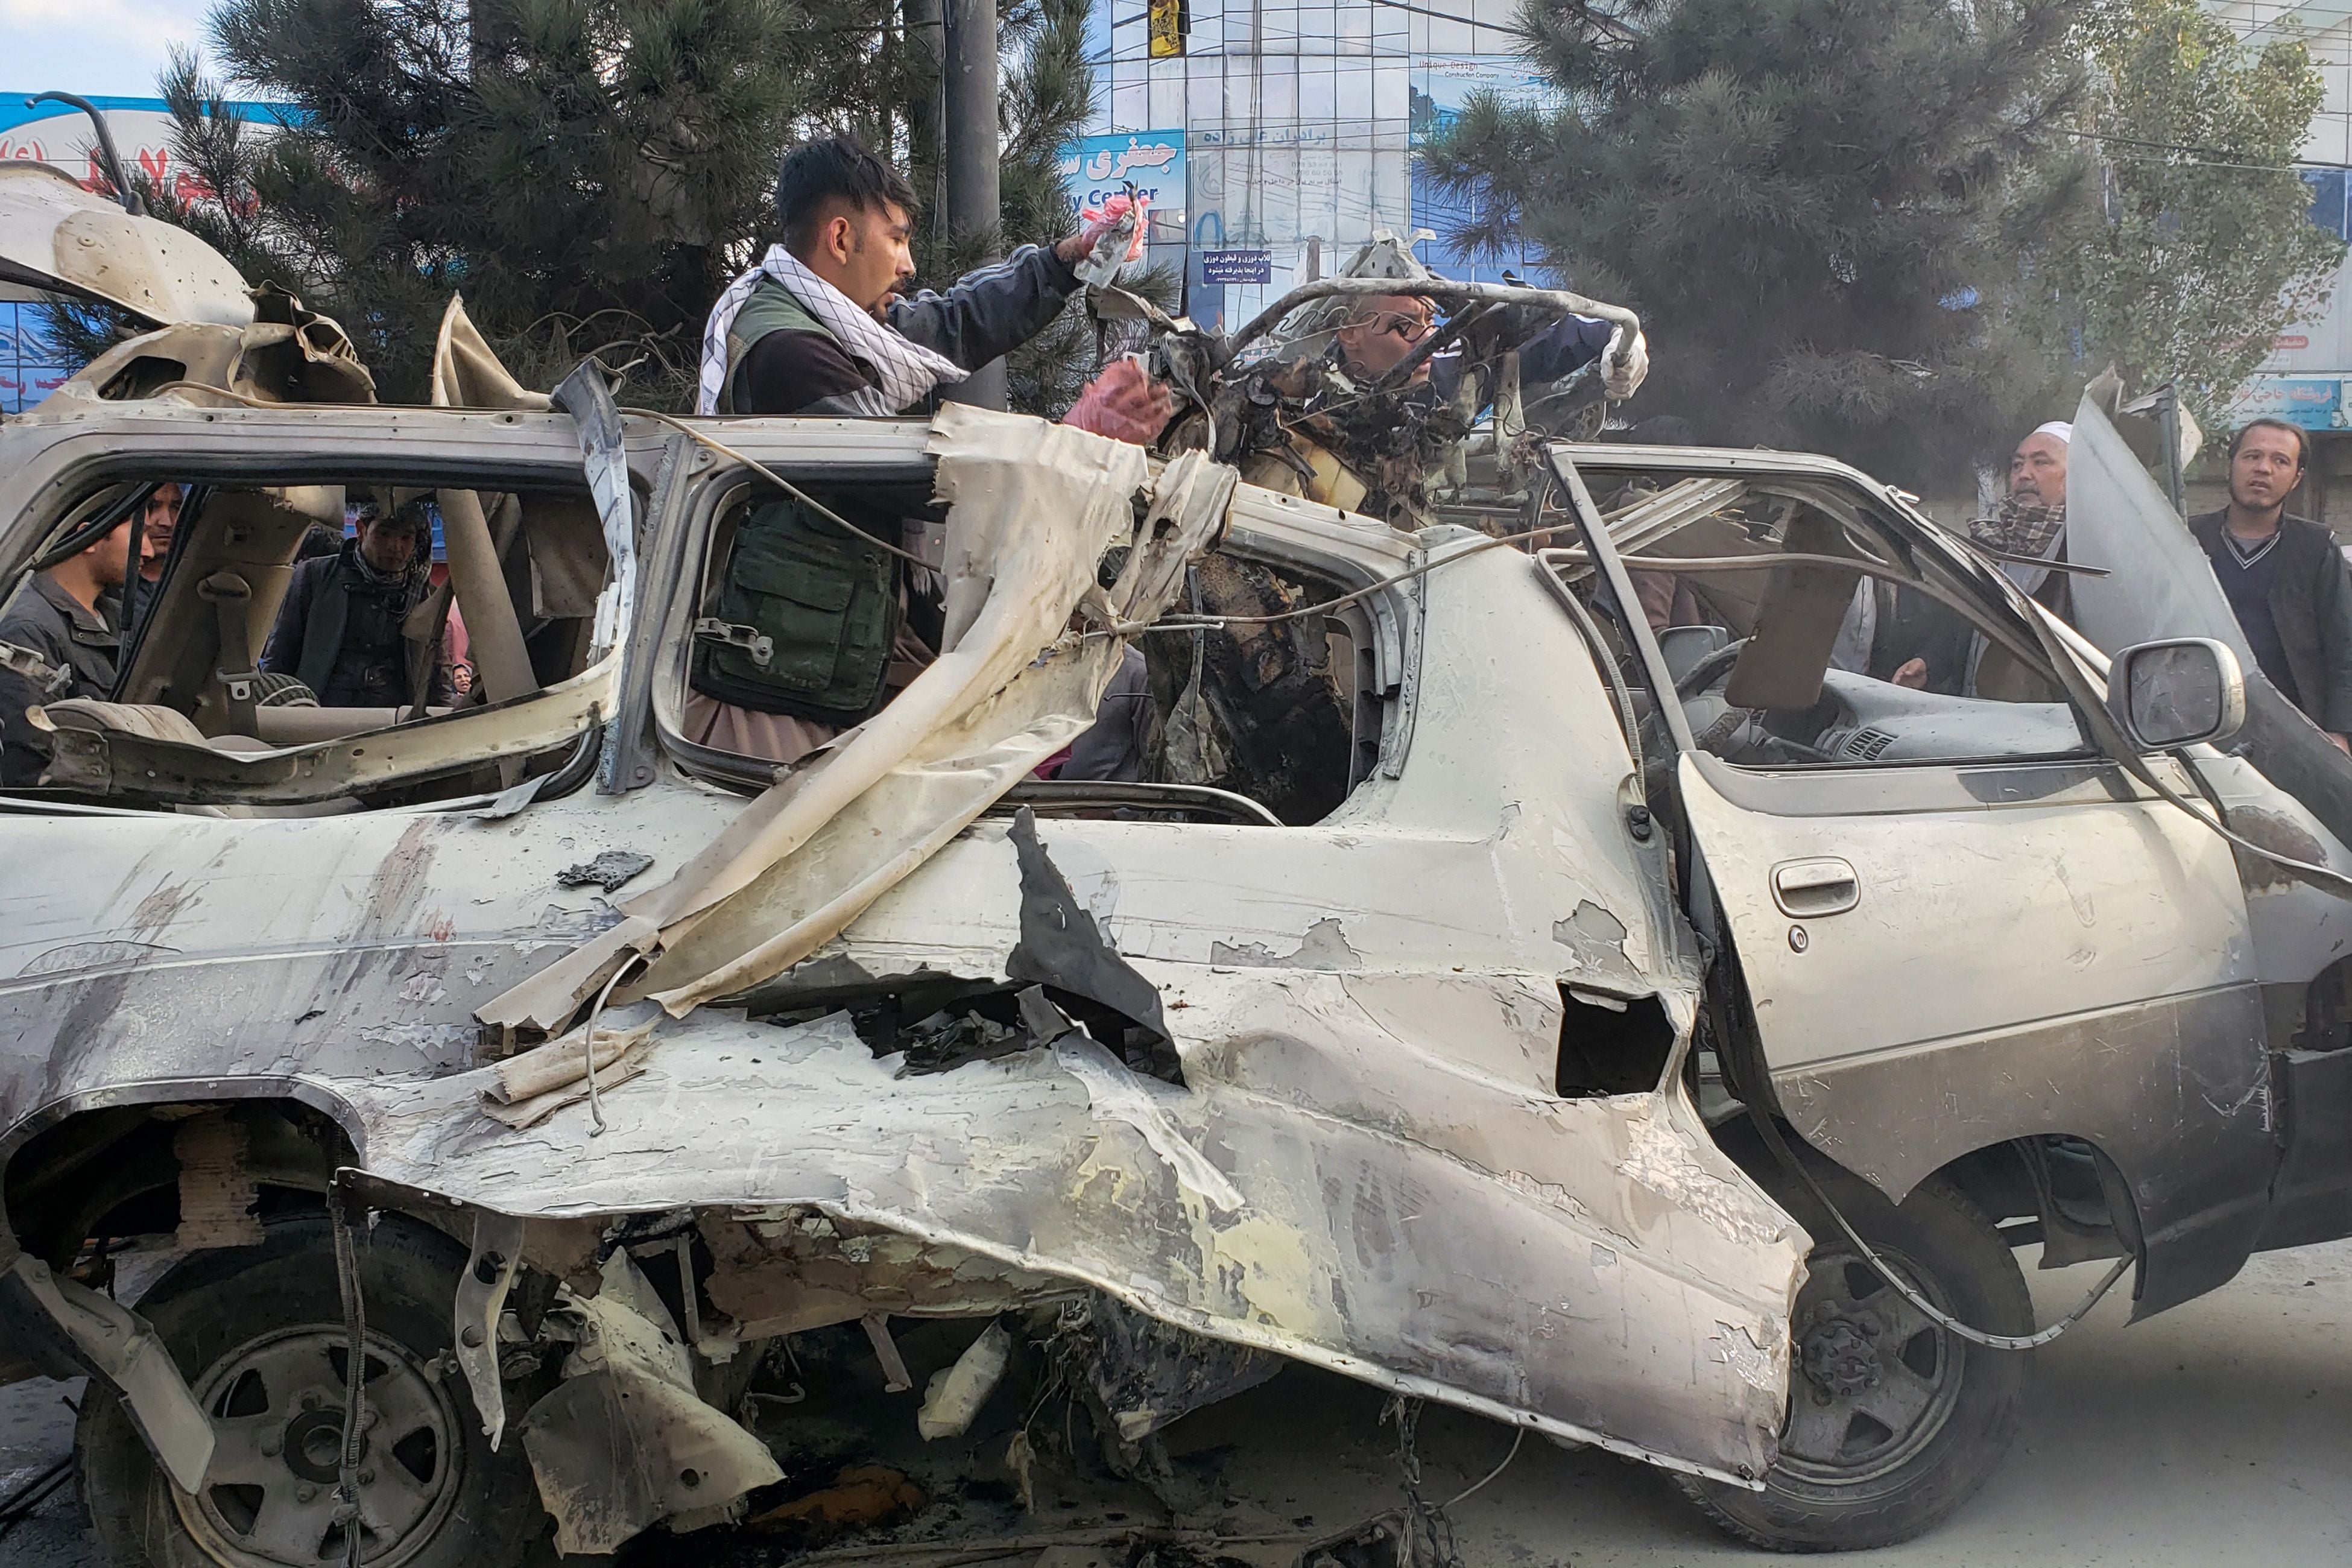 Residents gather next to a damaged minibus after a bomb blast where two people were killed and five wounded in Kabul on November 17, 2021.